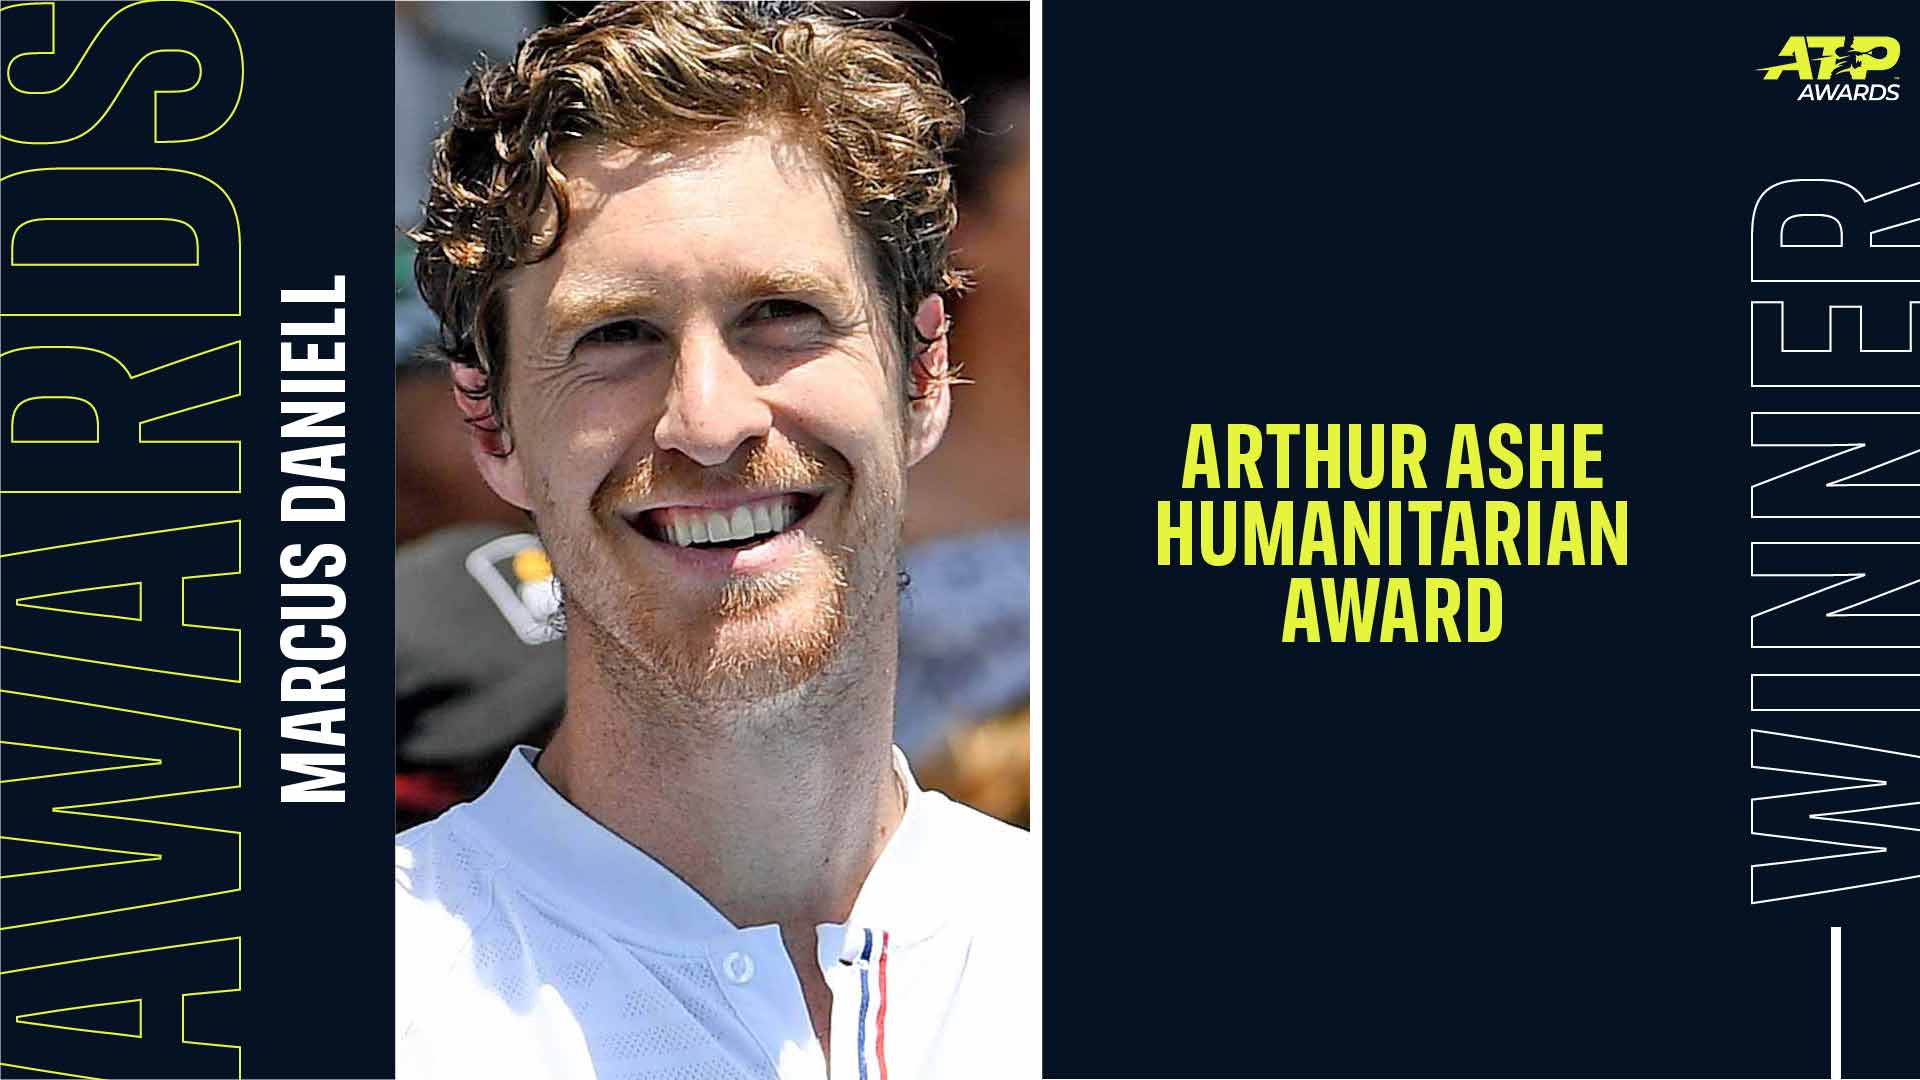 New Zealand's Marcus Daniell is the recipient of the Arthur Ashe Humanitarian Award in the 2021 ATP Awards. 